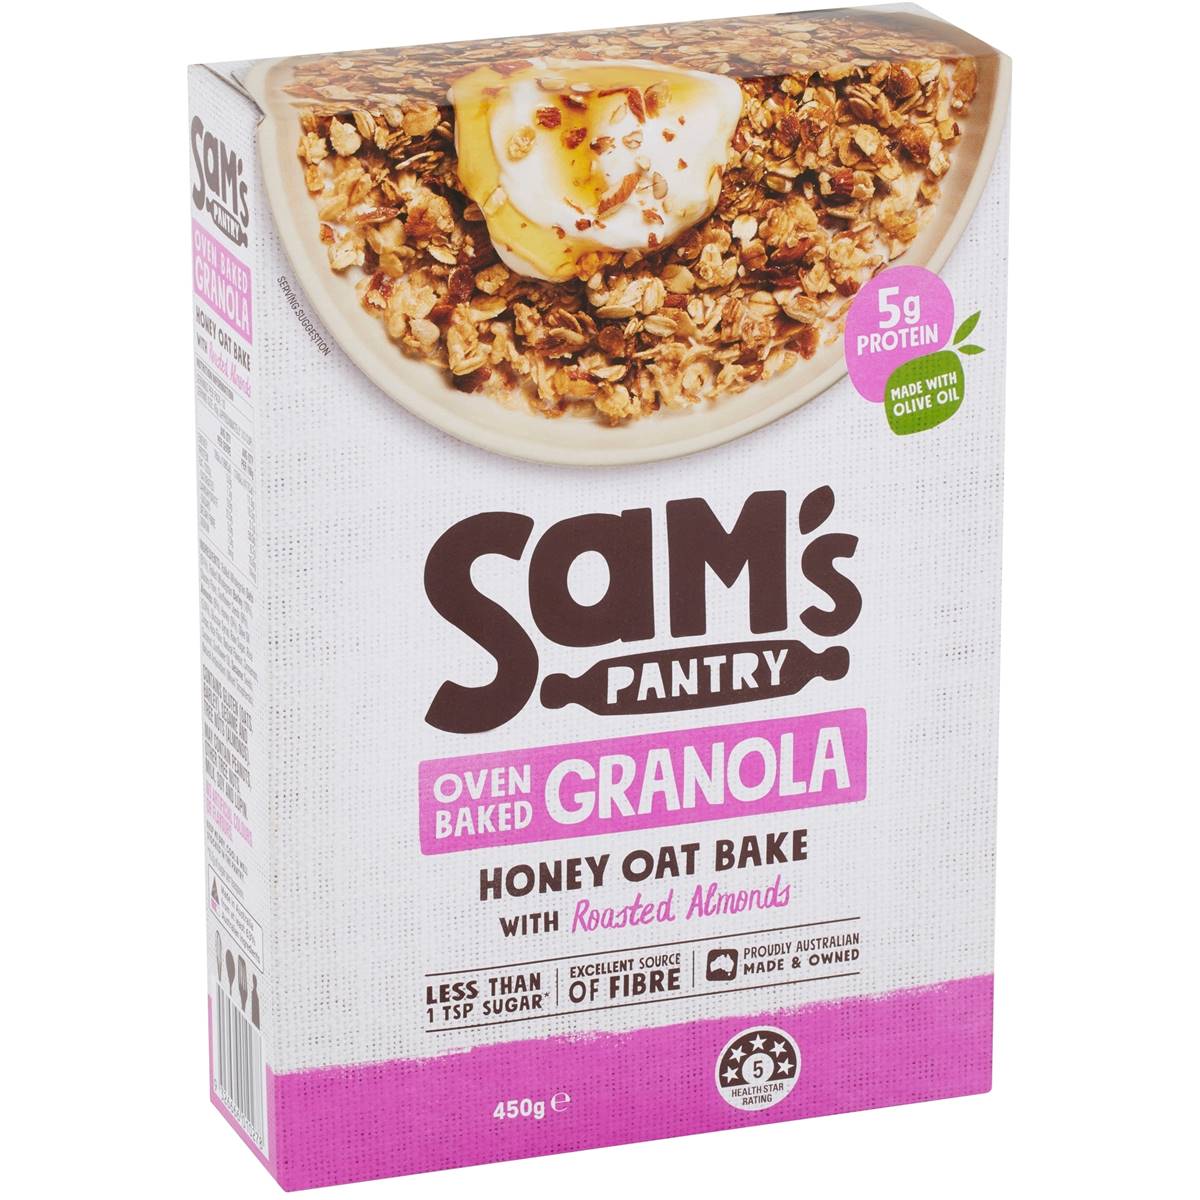 Calories in Sam's Pantry Honey Oat Bake With Roasted Almonds Granola